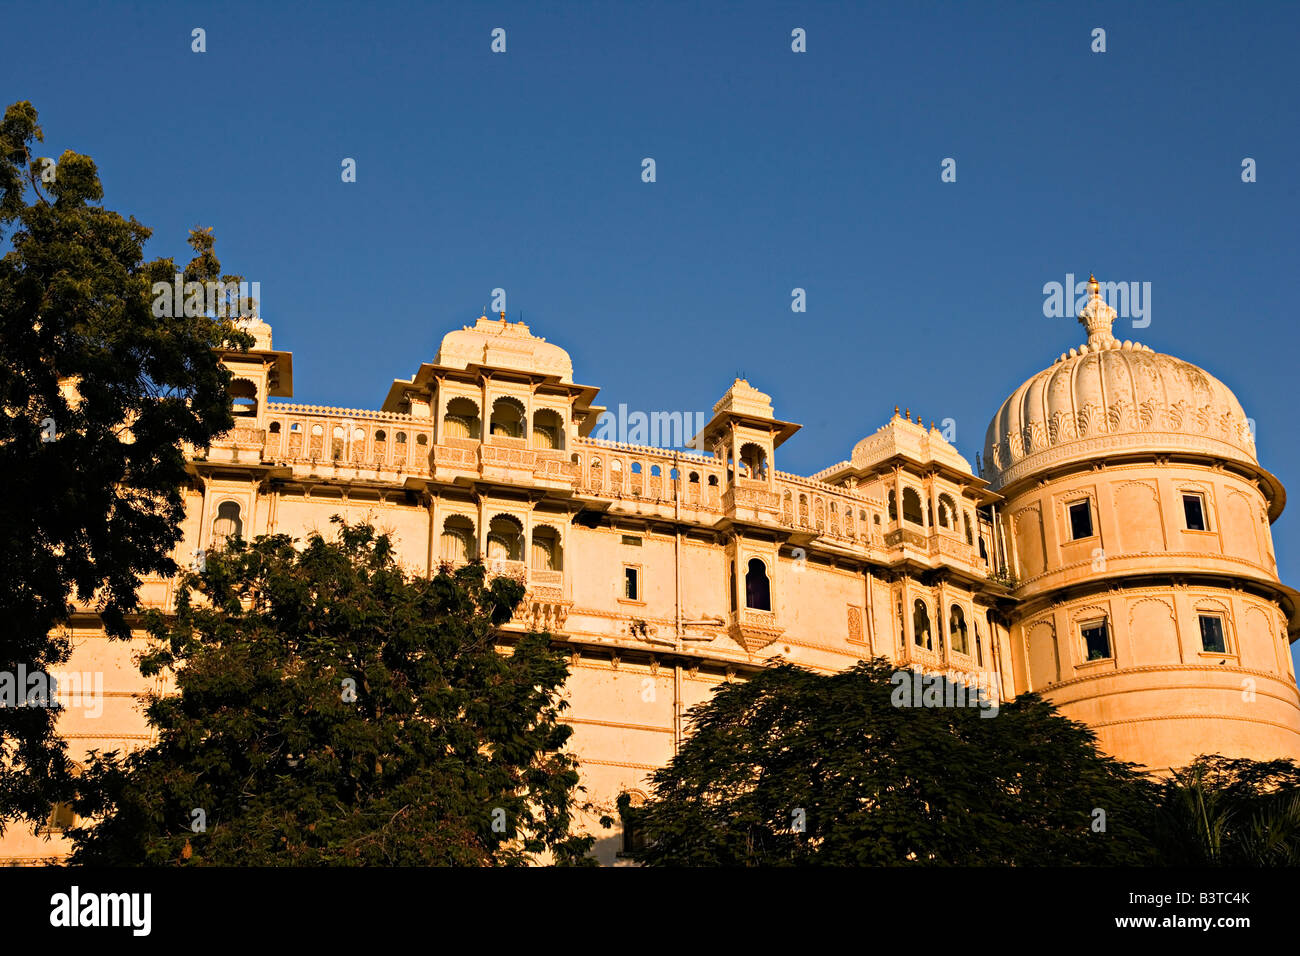 Facade of City Palace in the early morning, Udaipur, Rajasthan, India Stock Photo